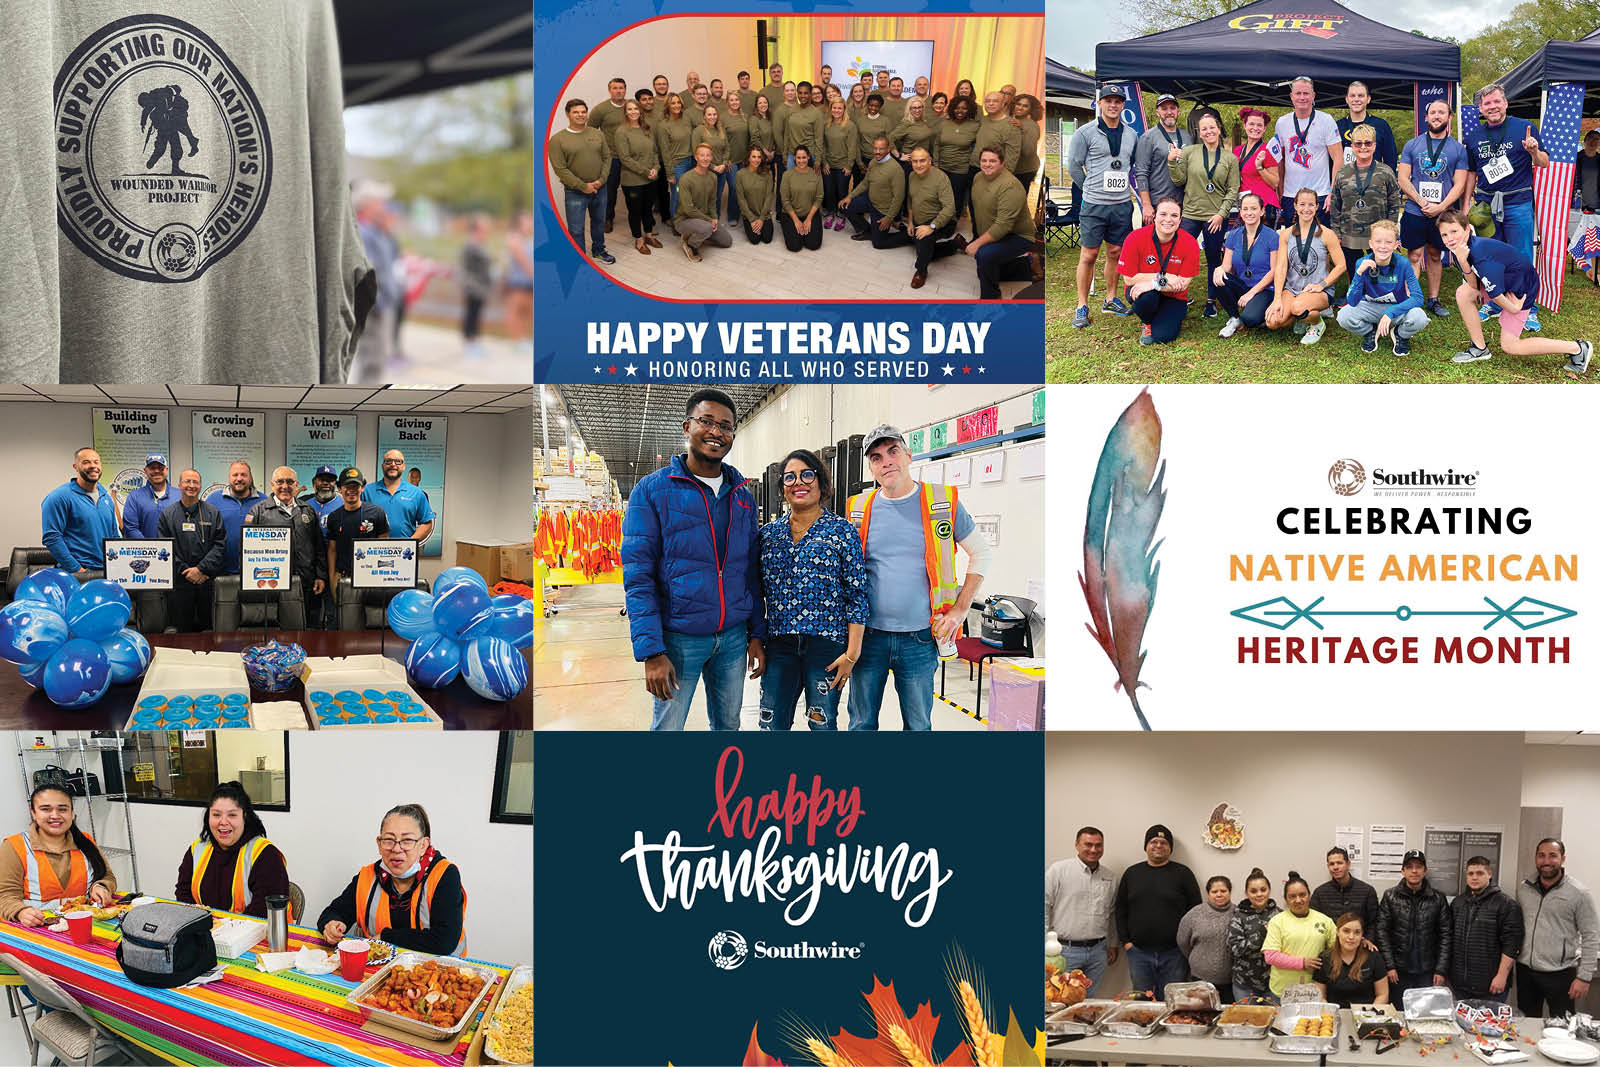 Southwire Recognizes Veterans Day, Native American Heritage Month, International Men’s Day and Thanksgiving